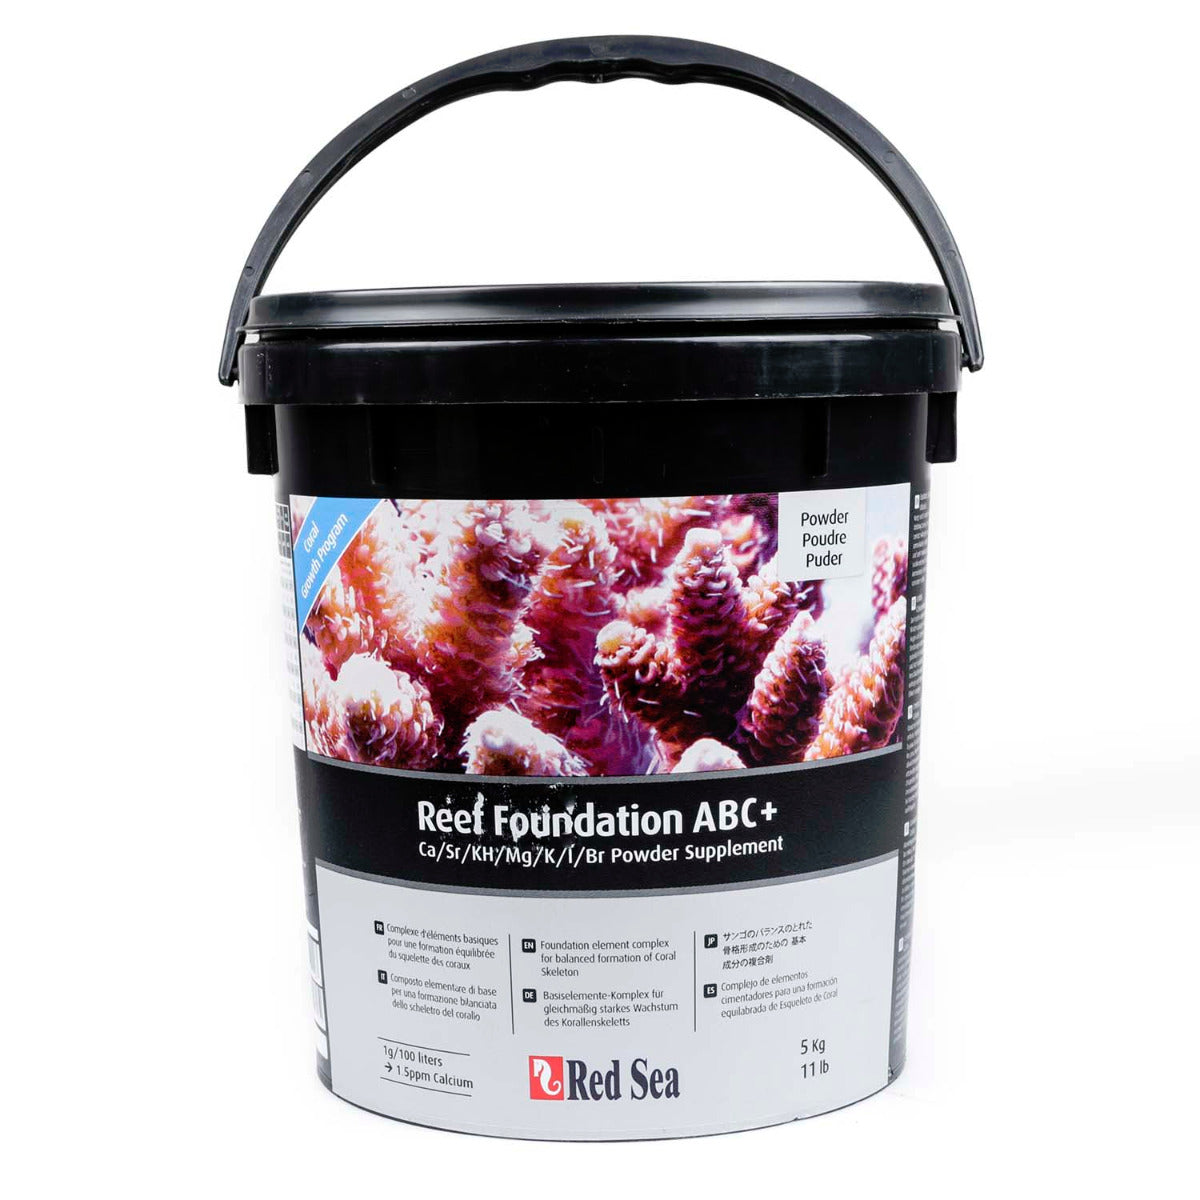 Red Sea Reef Foundation ABC+ - 5kg Powdered Supplement